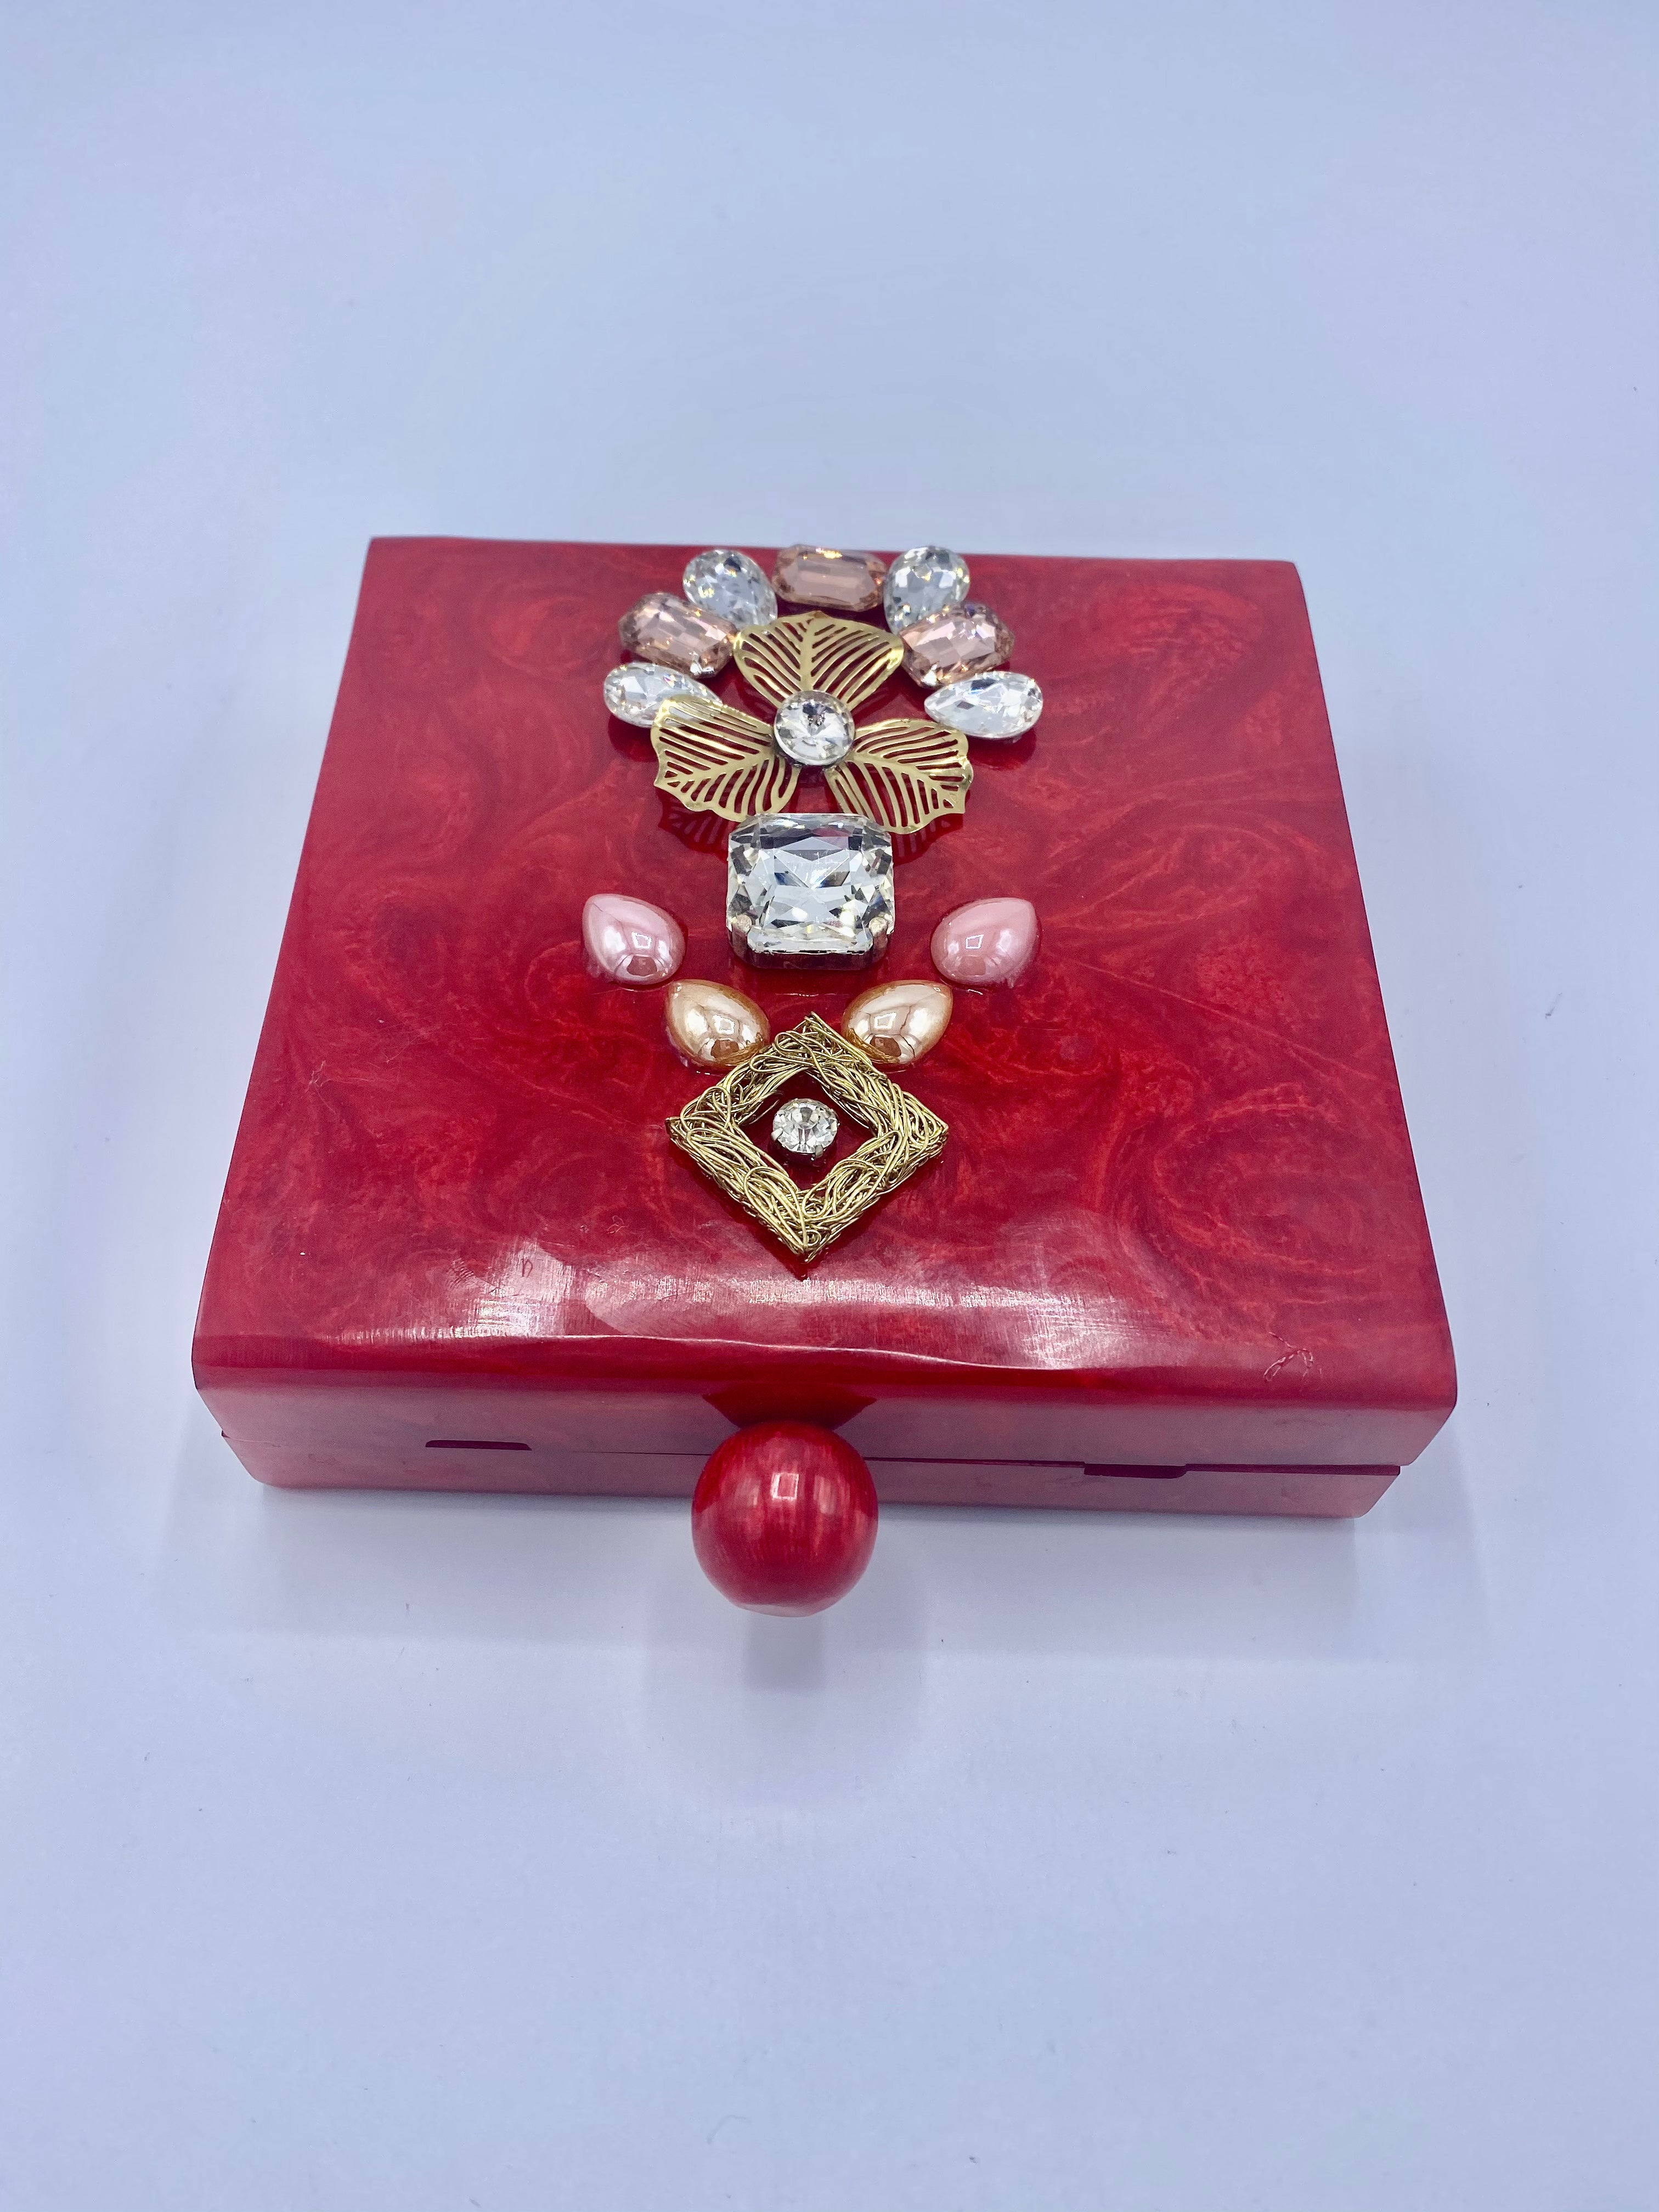 Handcrafted Square Resin with Agate Stone Clutch